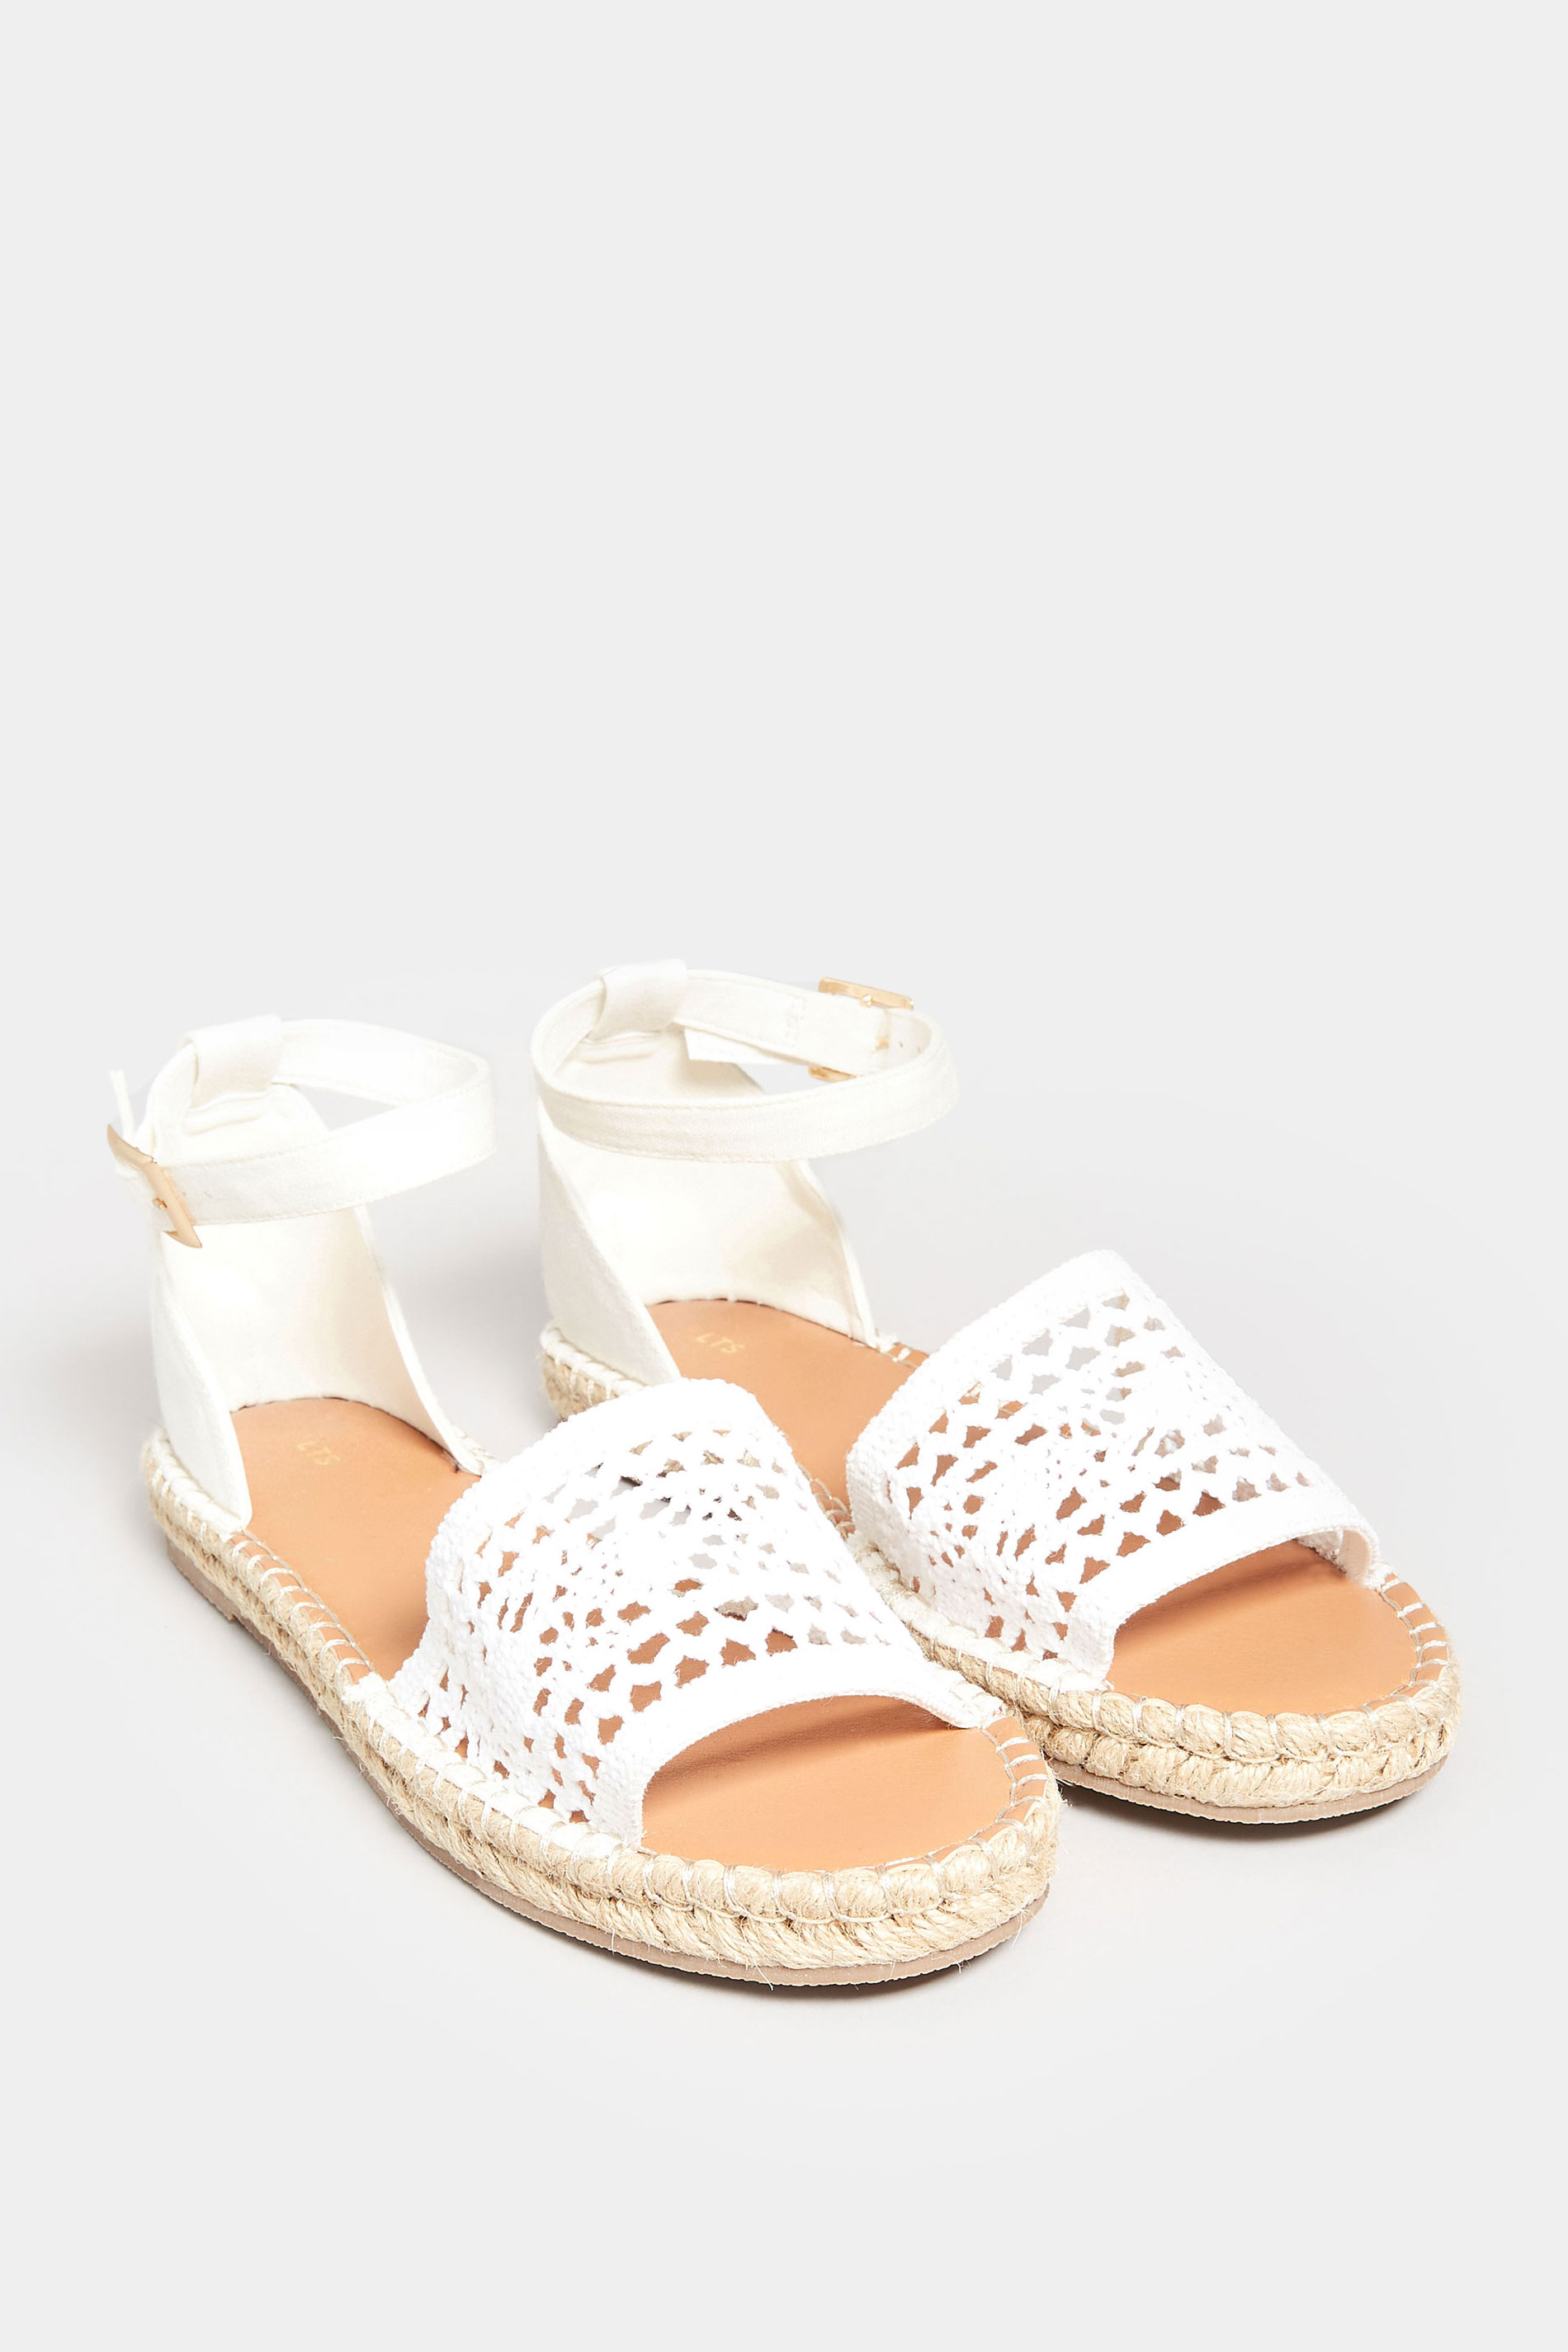 LTS White Espadrille Sandals In Standard Fit| Long Tall Sally  2